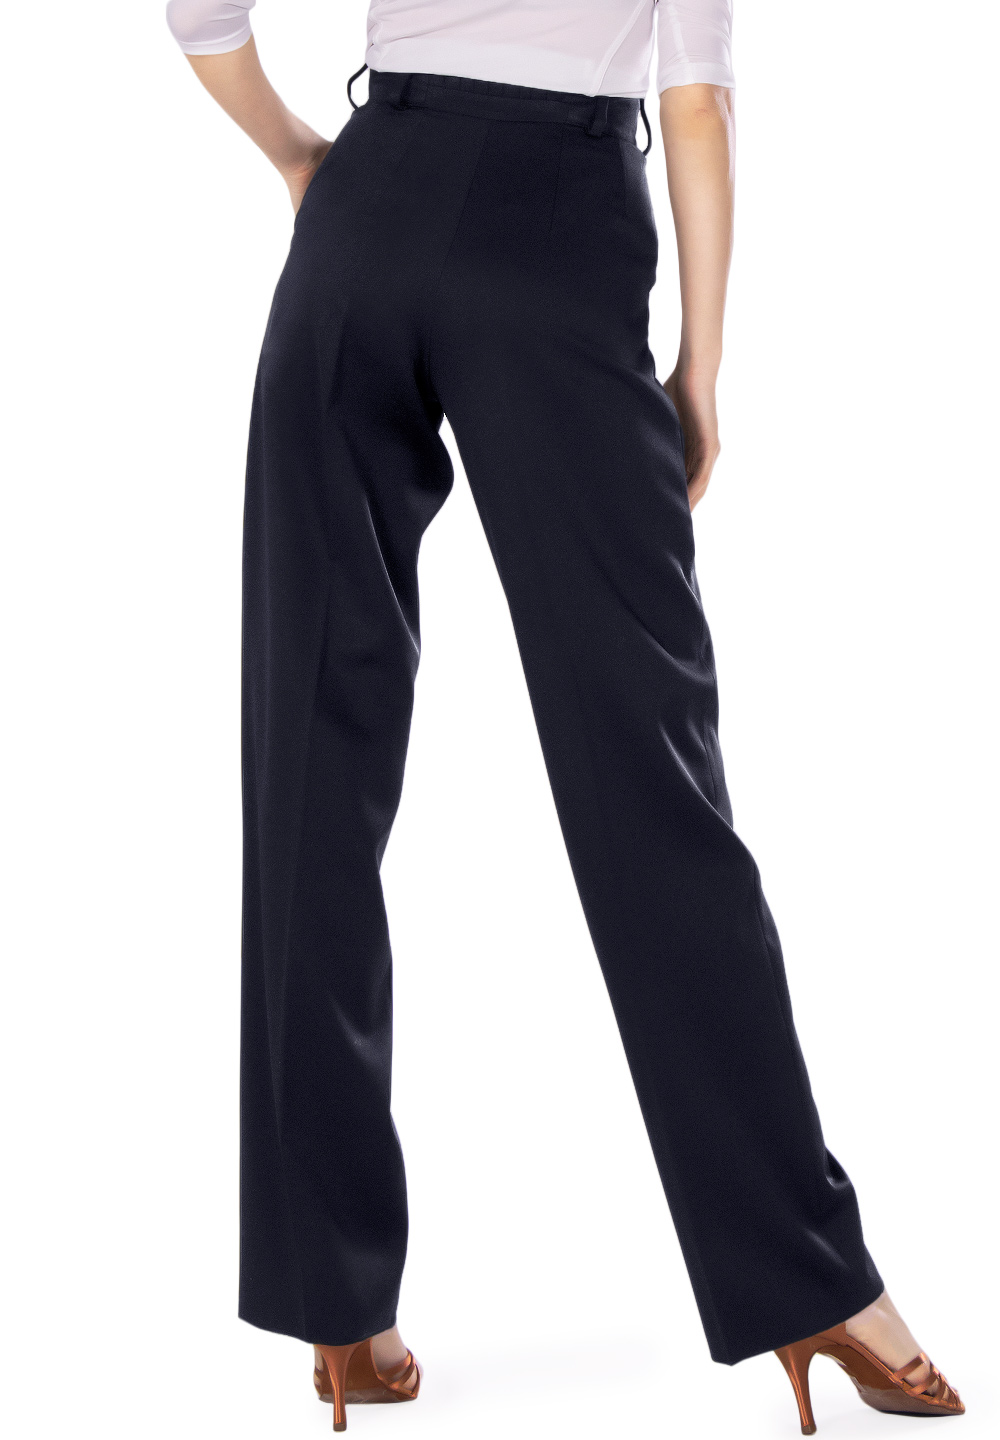 Maly Accordian Pleat Dance Trousers MF191401 | Pants